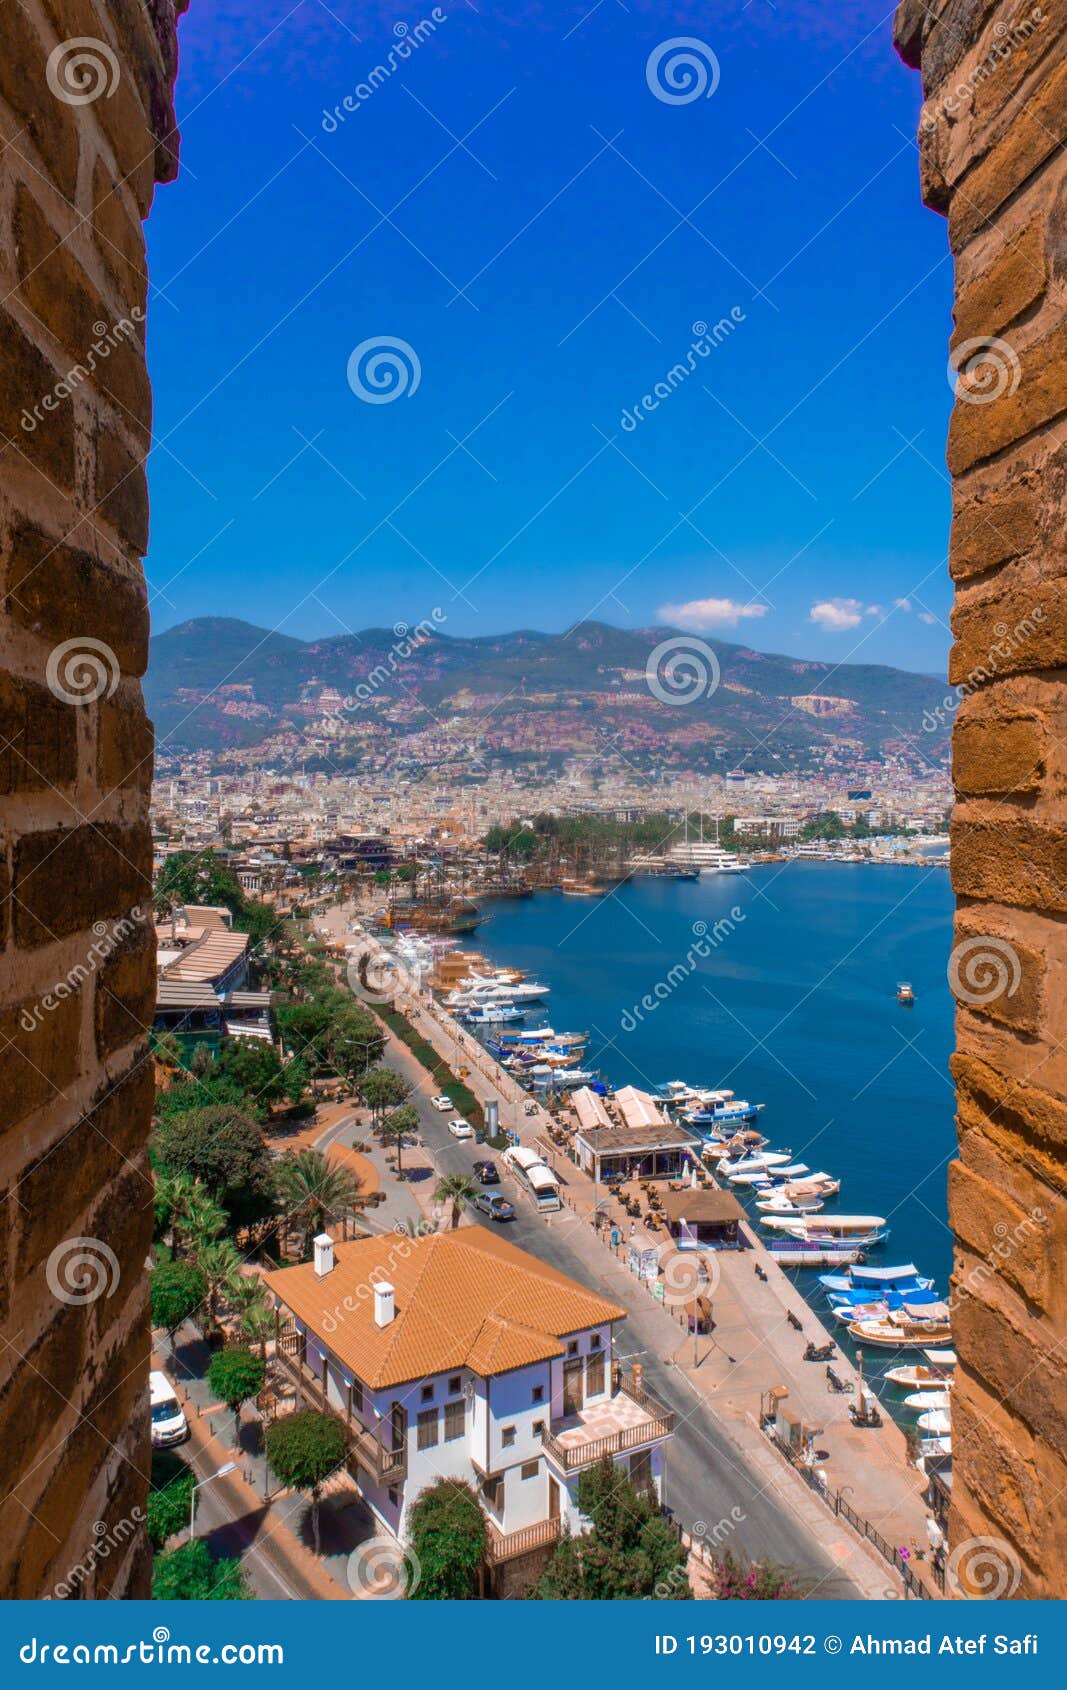 different photos of the beautiful coastal city of alanya